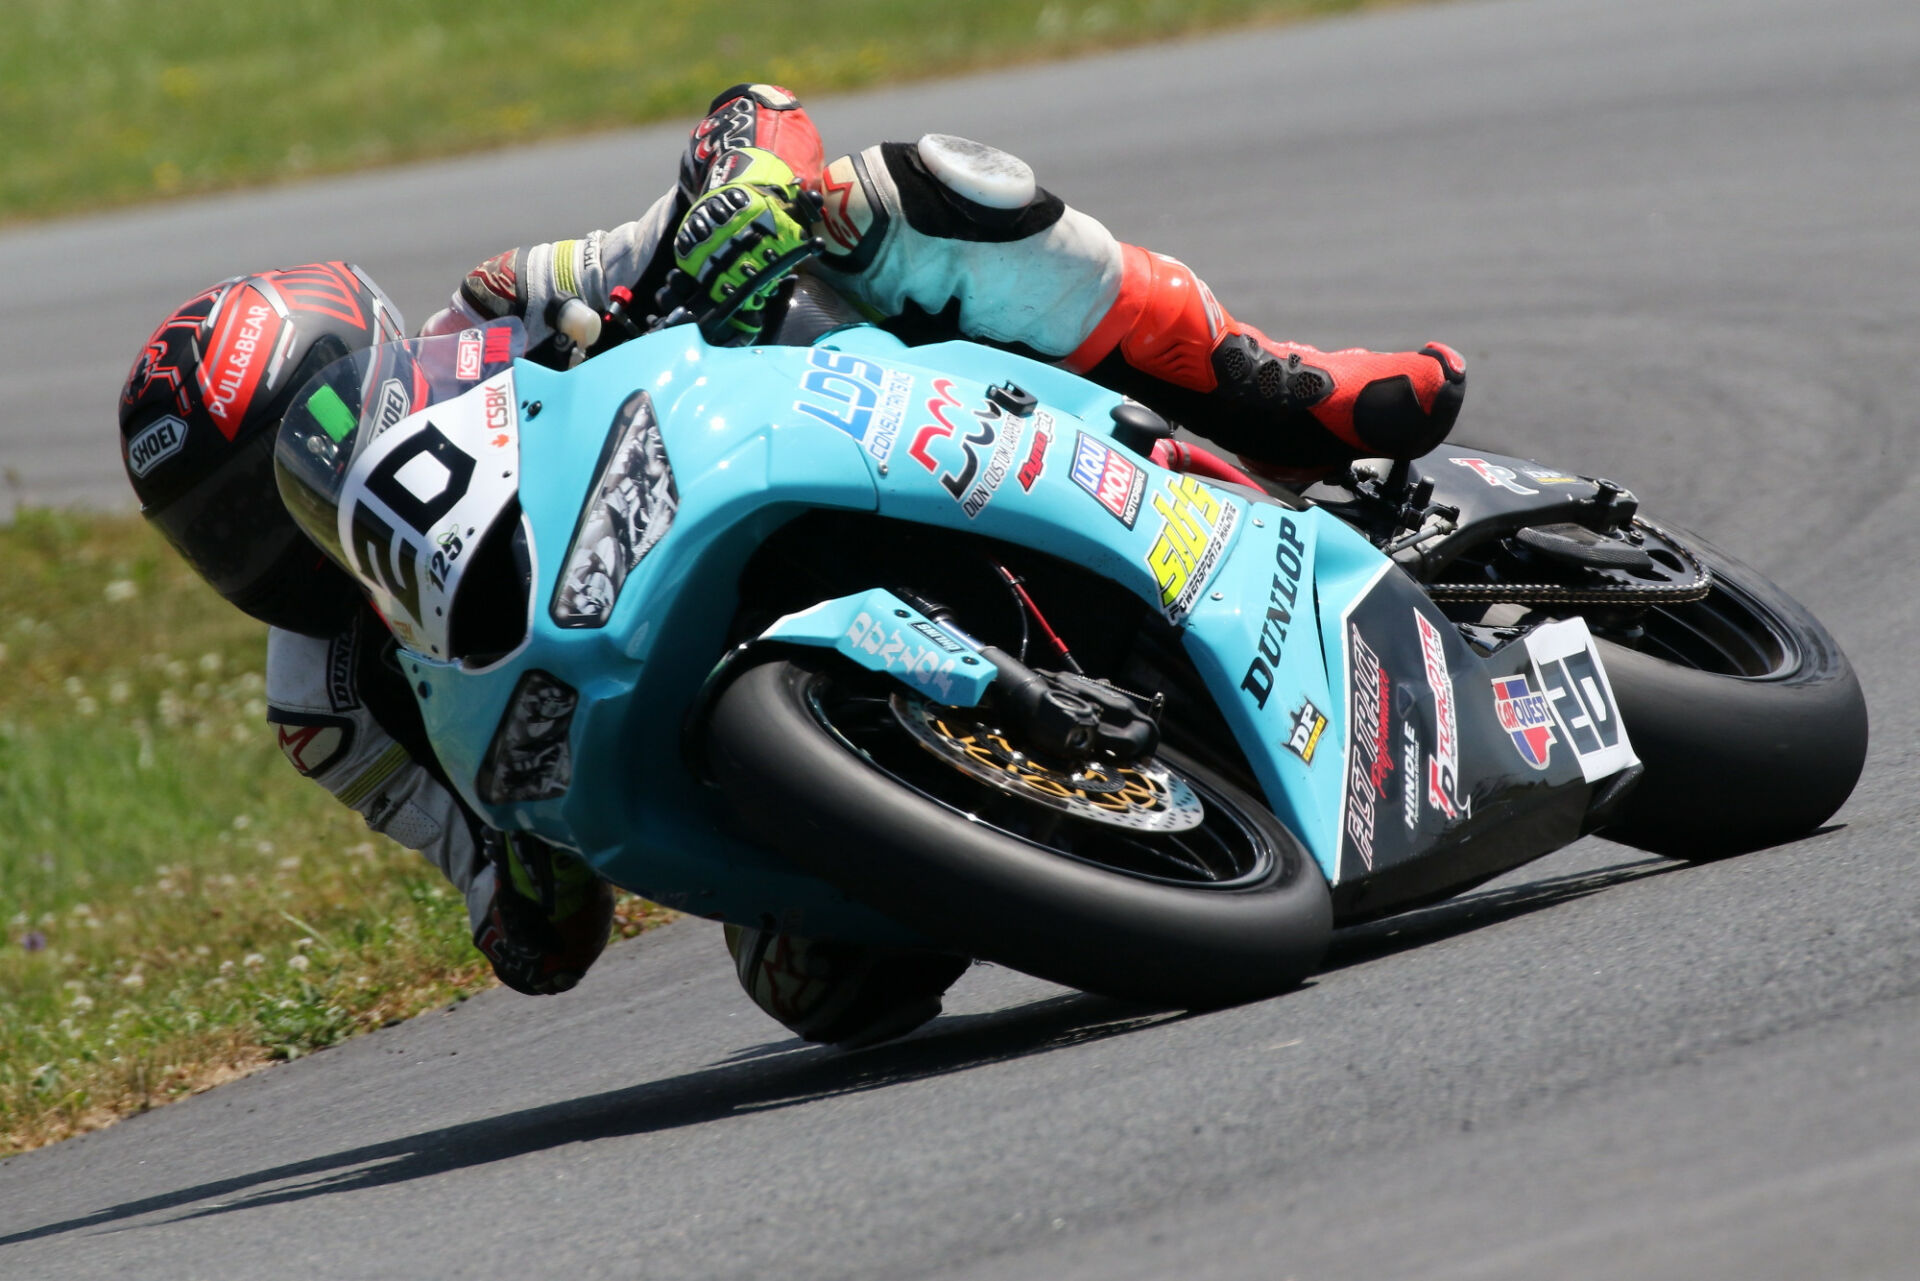 Rookie Pro Trevor Dion (20) heads into this weekend's CSBK season finale at CTMP looking to secure the Pro Sport Bike championship. Photo by Rob O'Brien, courtesy CSBK/PMP.